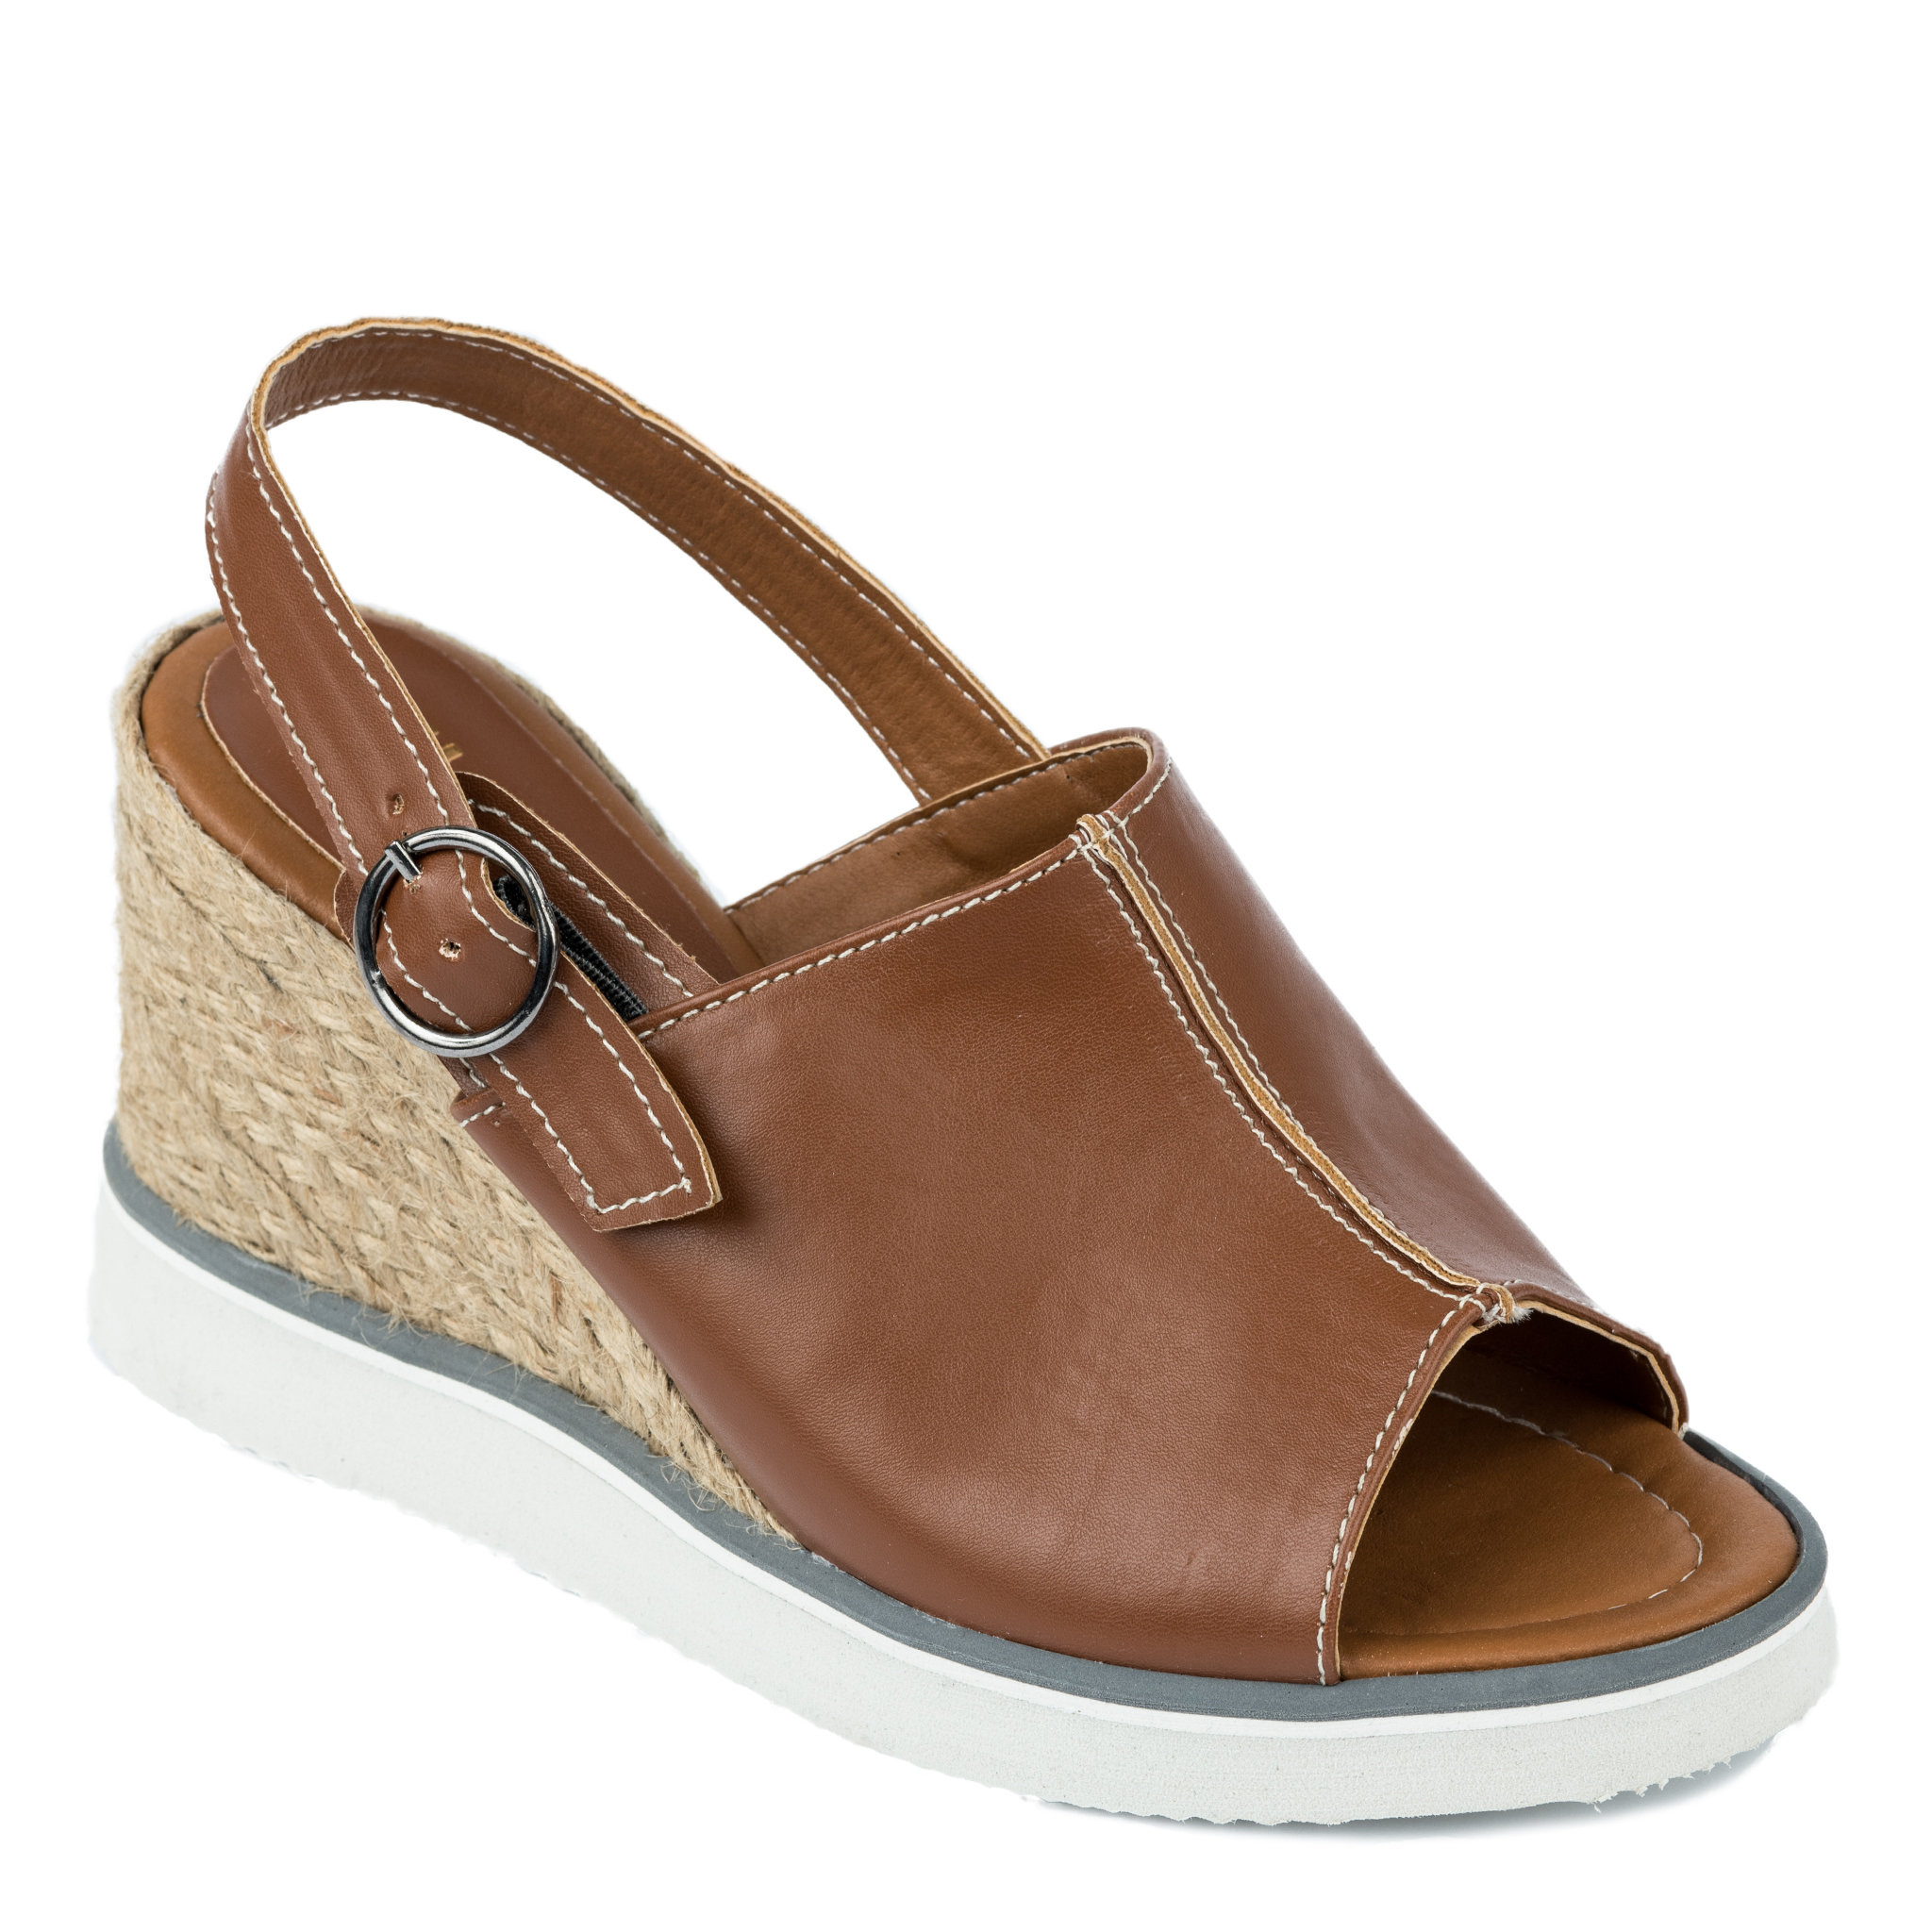 WEDGE SANDALS WITH JUTA AND SAW - BROWN